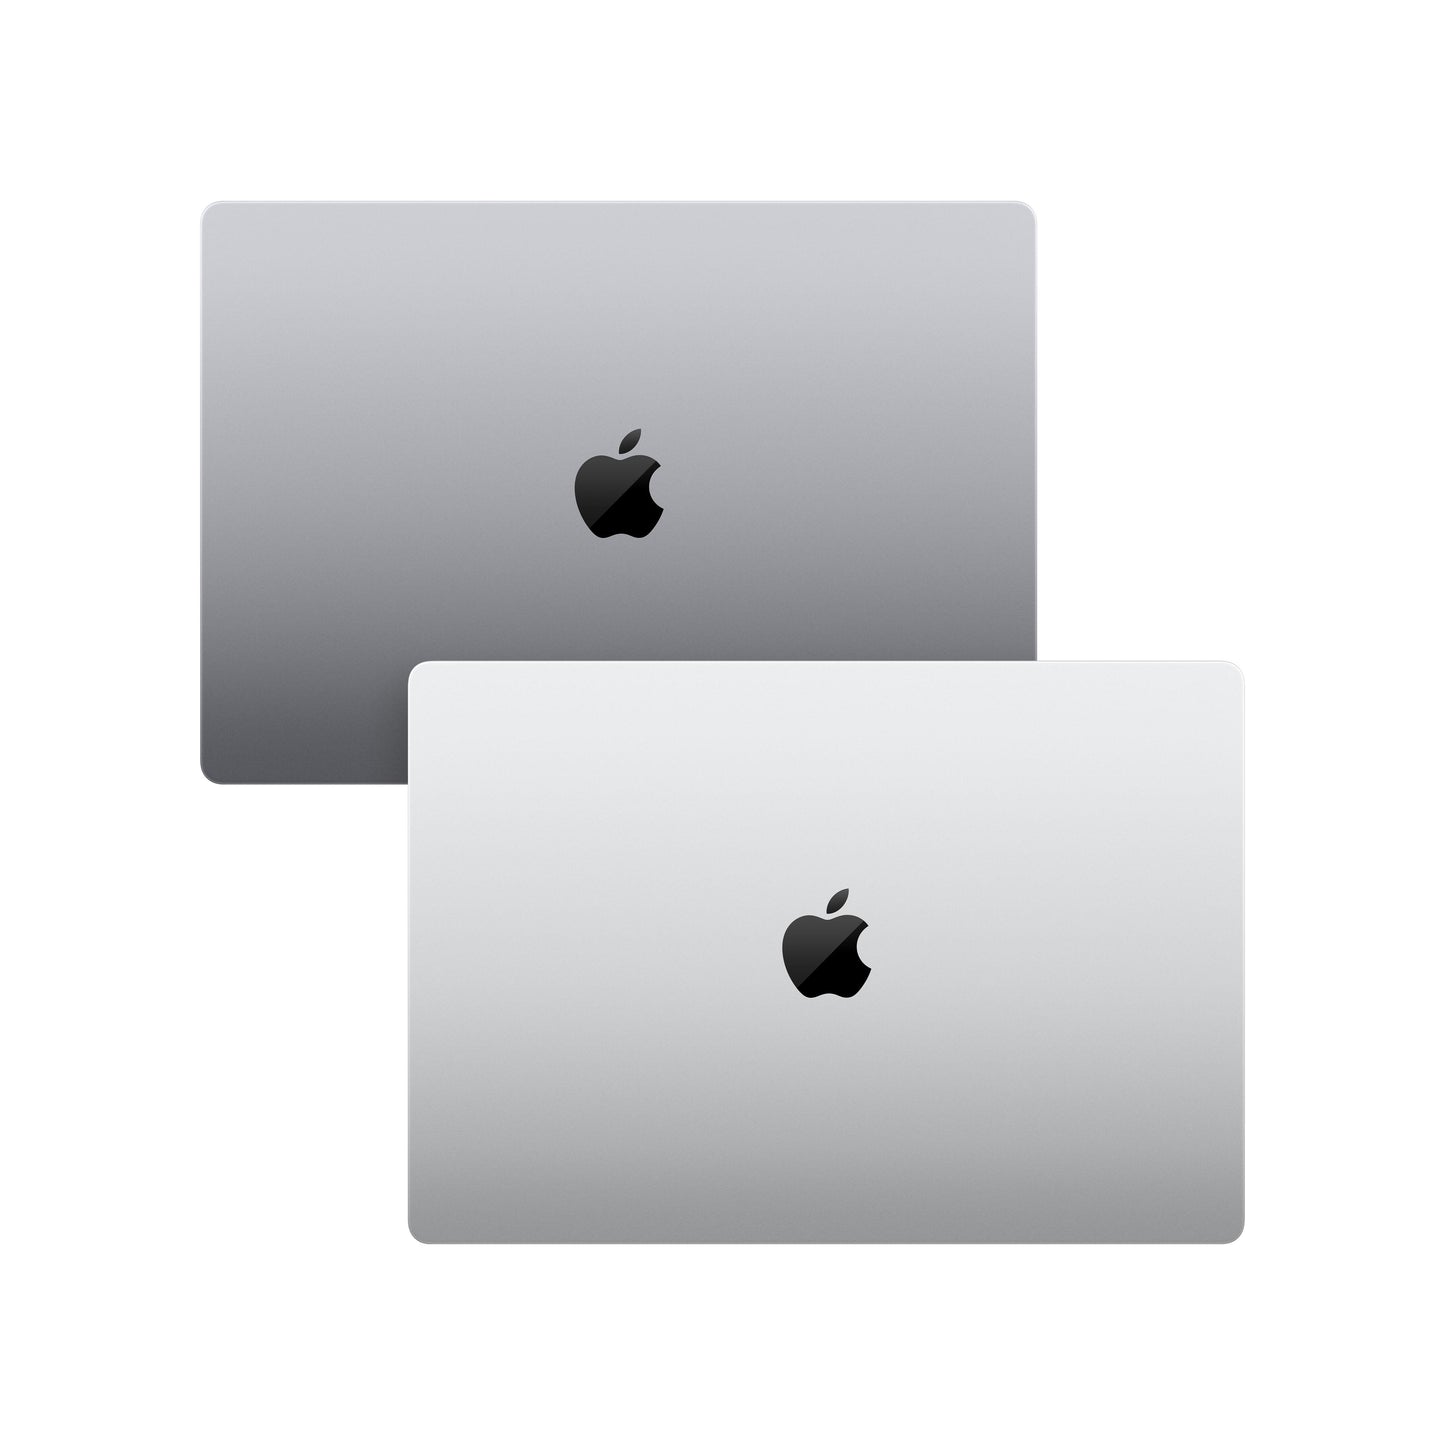 16-inch MacBook Pro: Apple M1 Pro chip with 10_core CPU and 16_core GPU, 512GB SSD - Space Grey